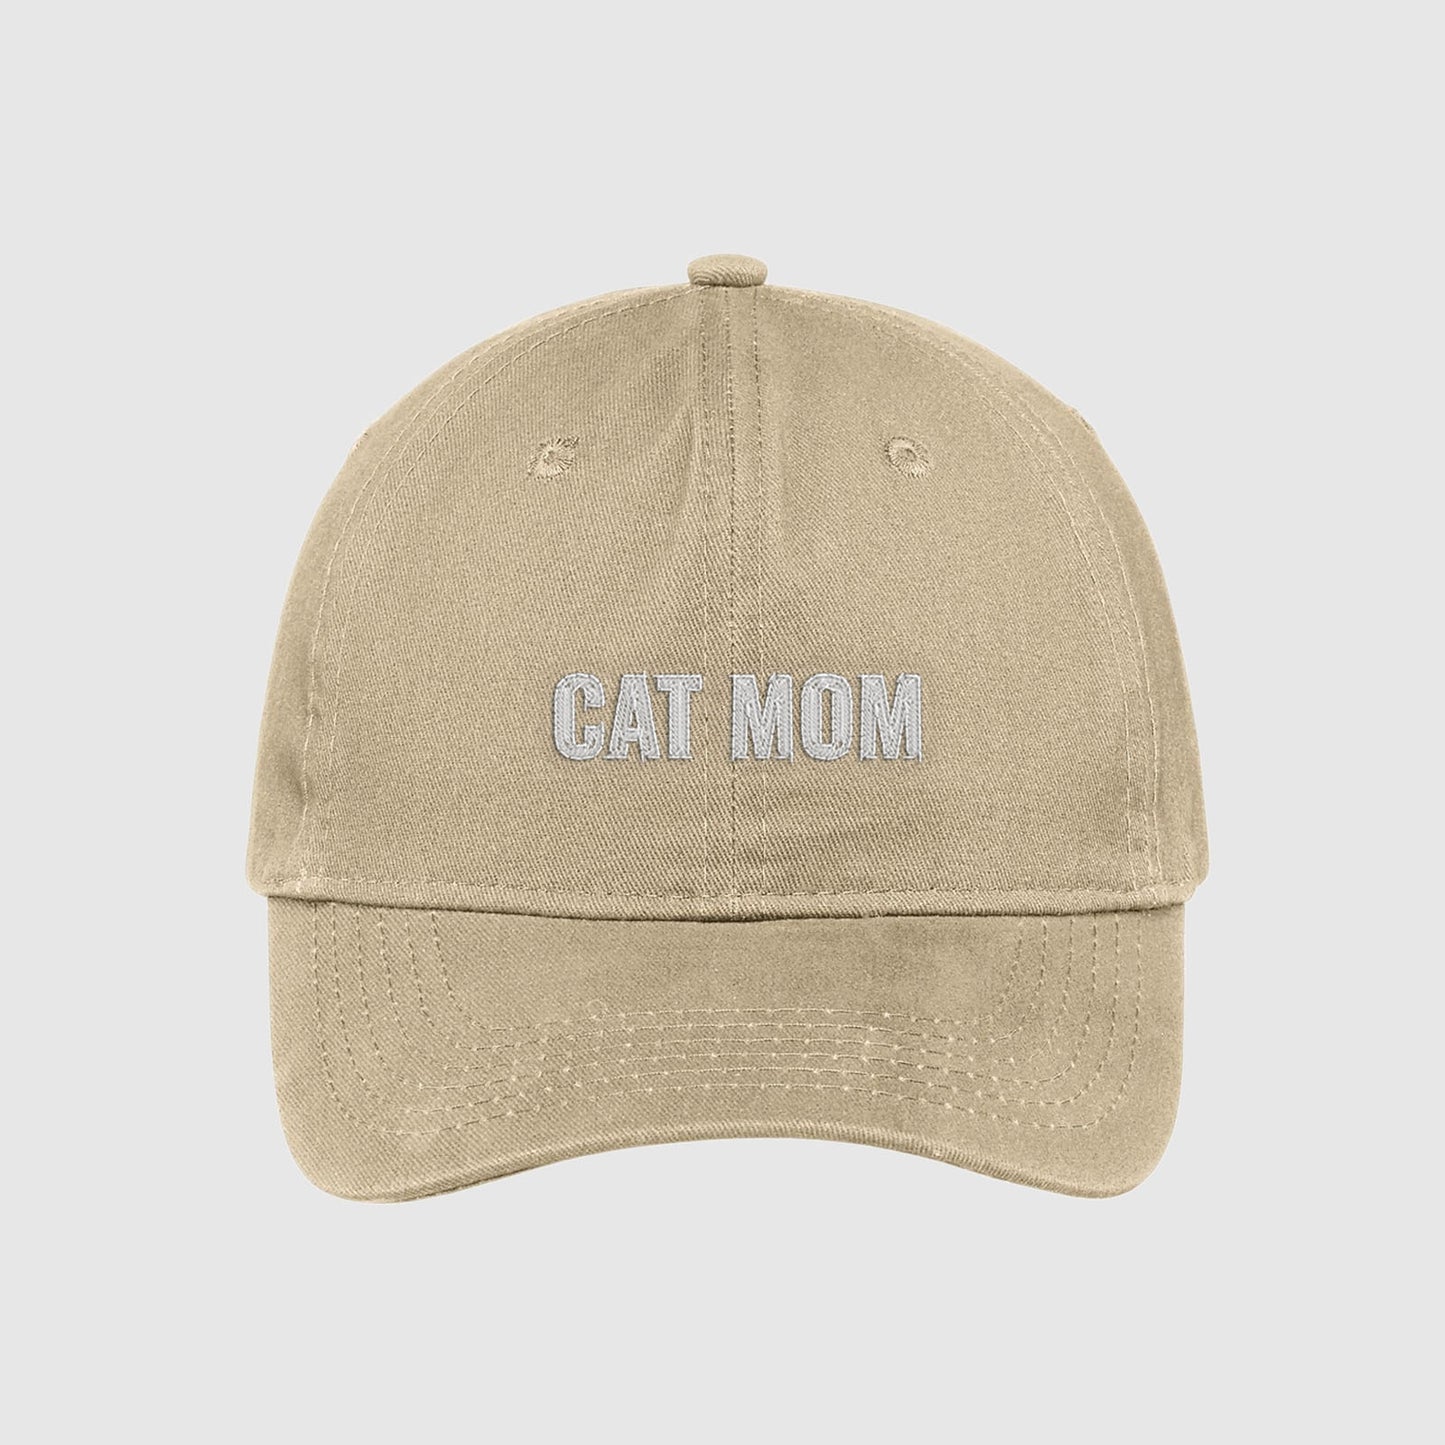 Tan Cat Mom Hat embroidered with white text